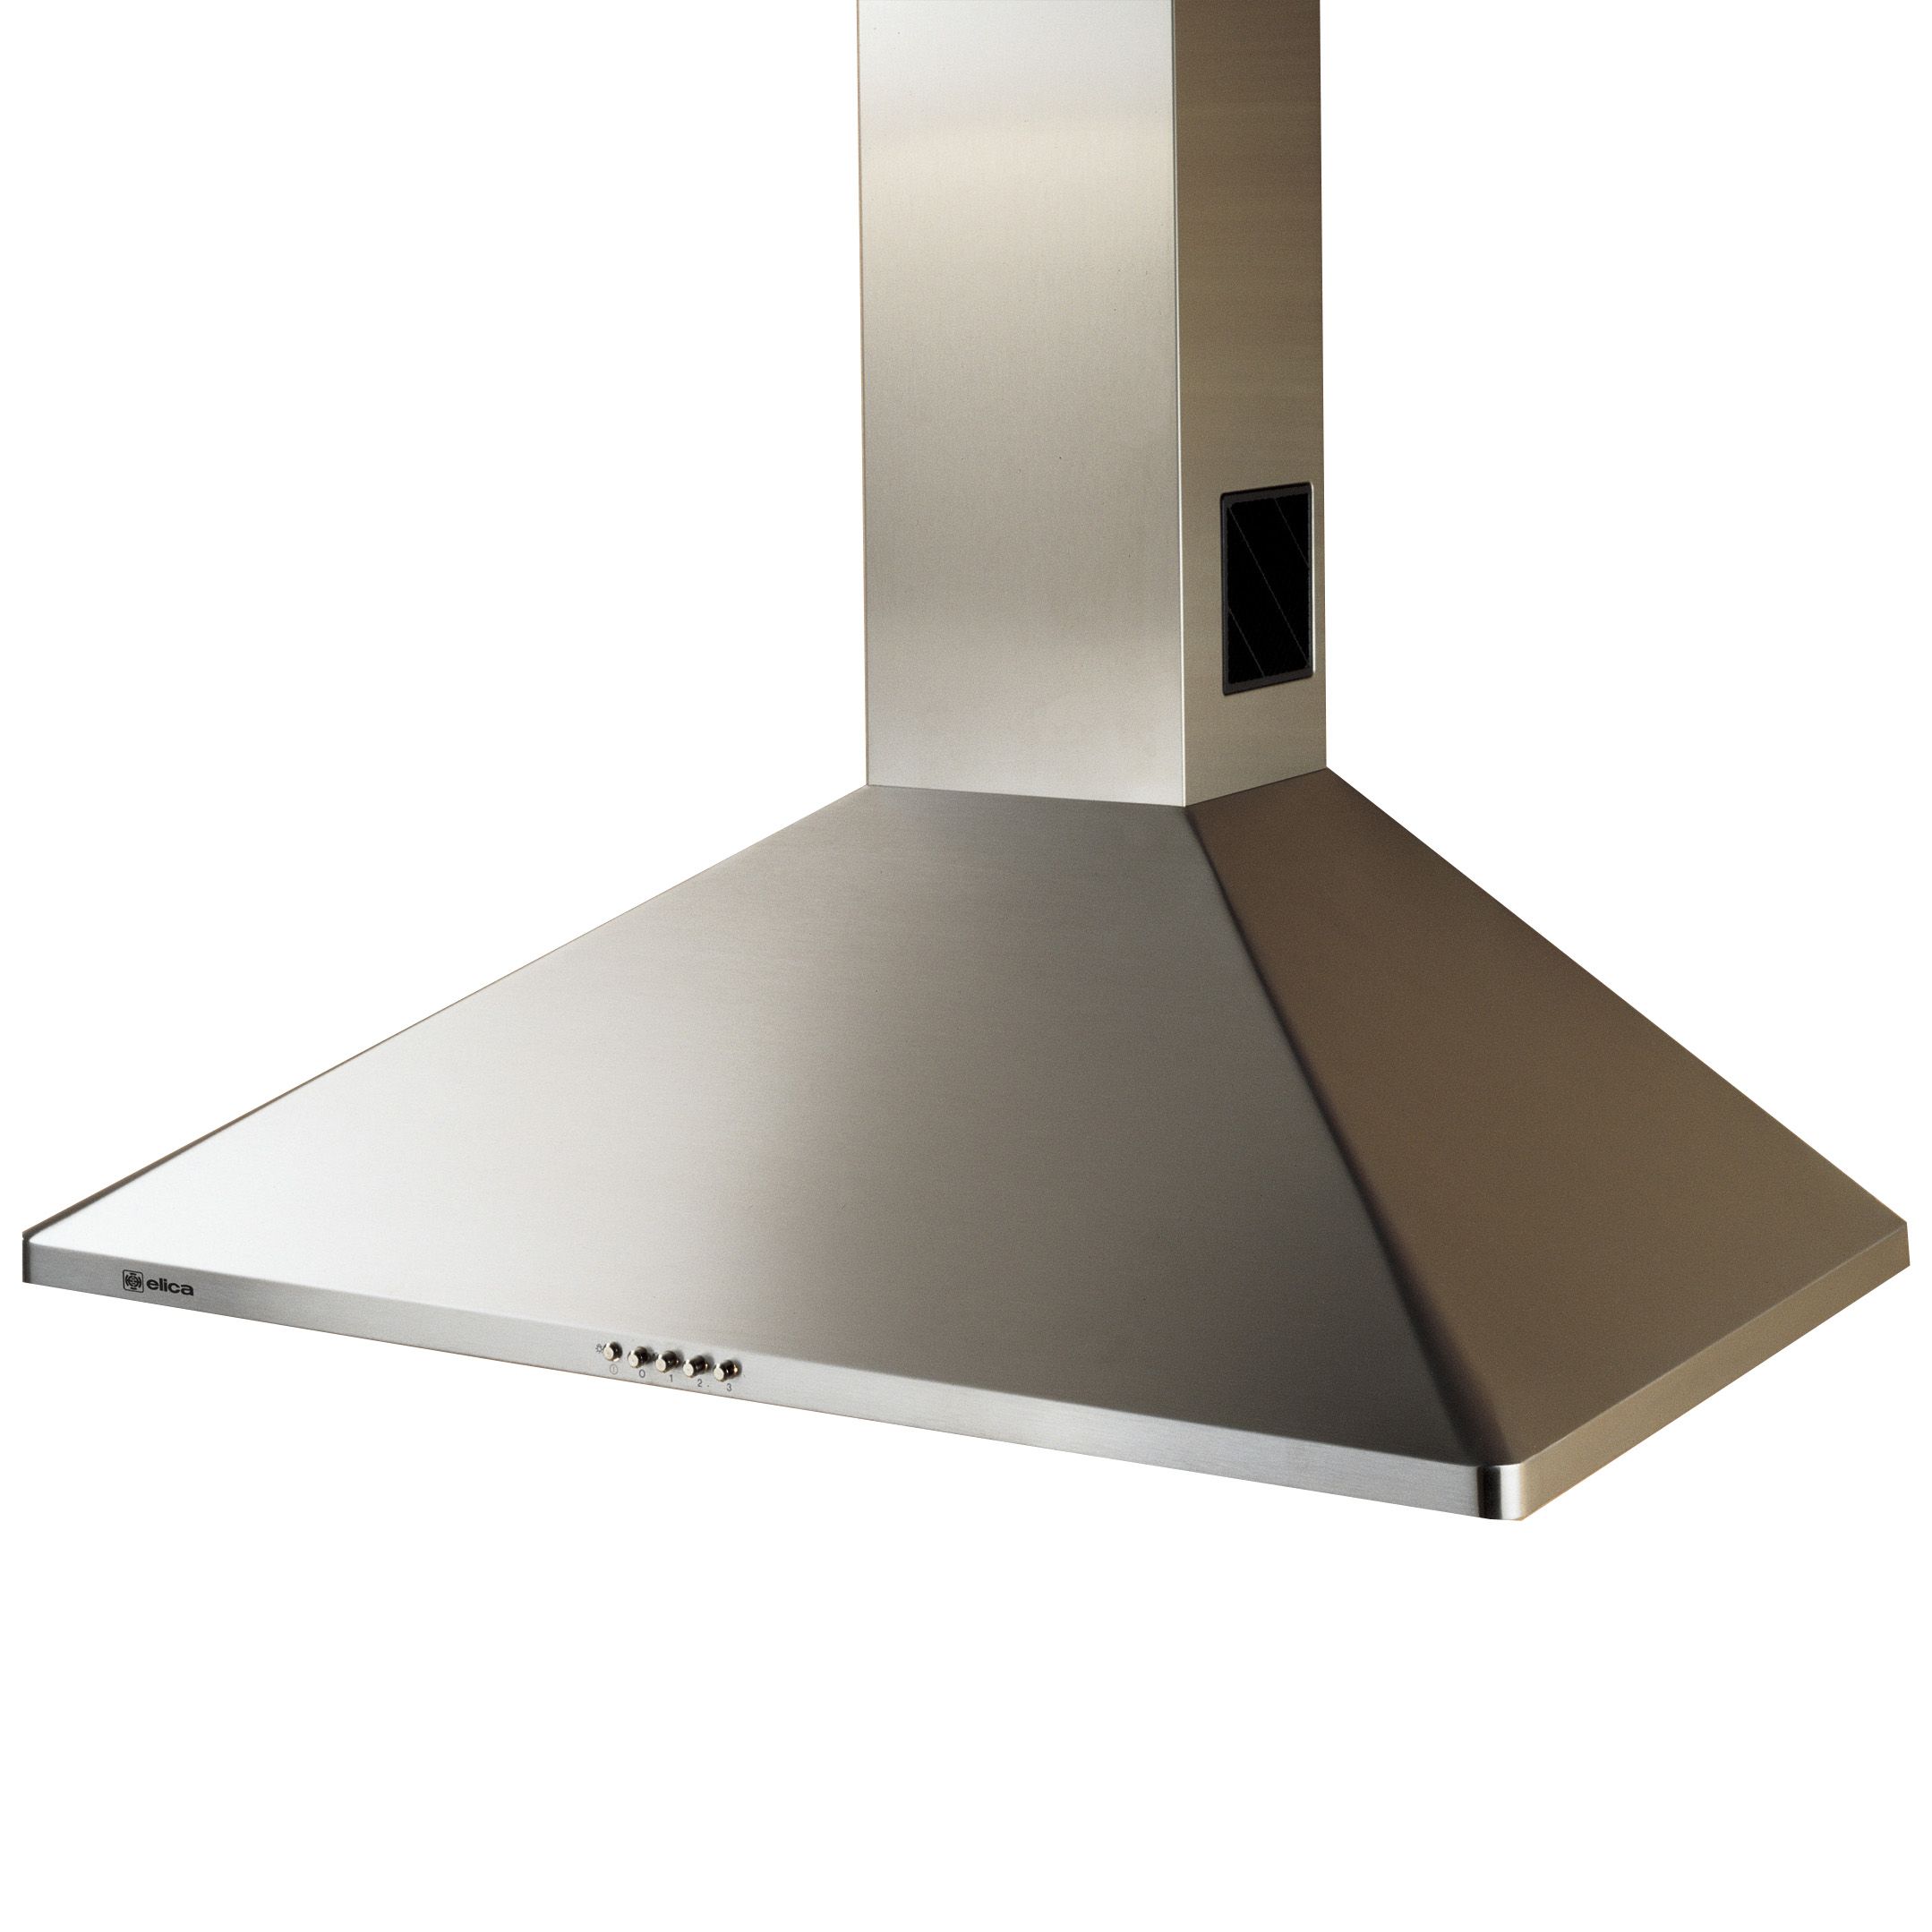 Elica Concept Key 90 Chimney Cooker Hood, Stainless Steel at John Lewis